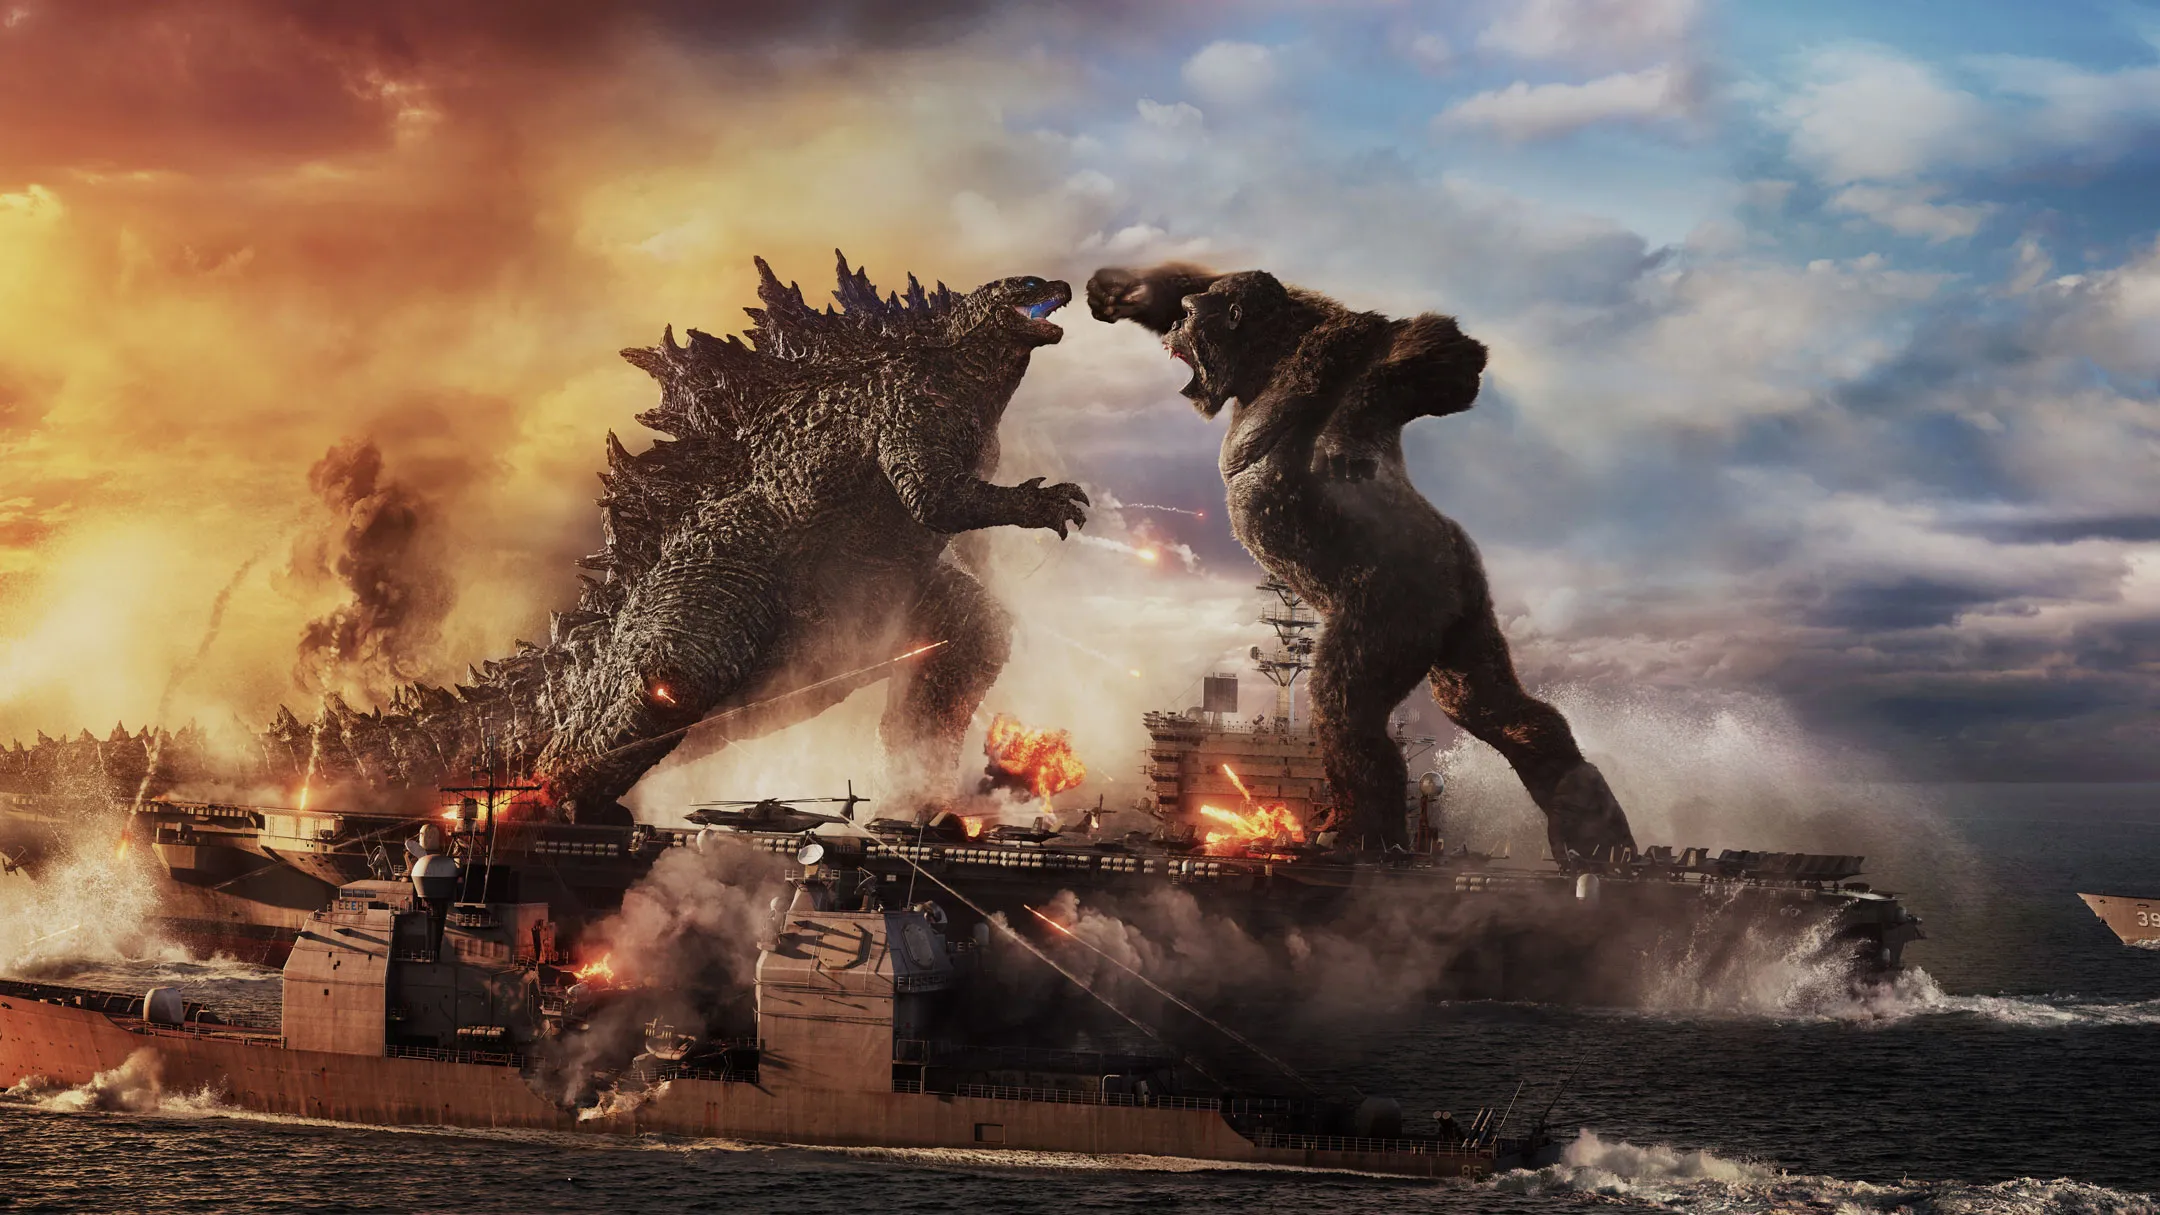 Godzilla Minus One: A Cinematic Triumph or Just Another Monster Movie?